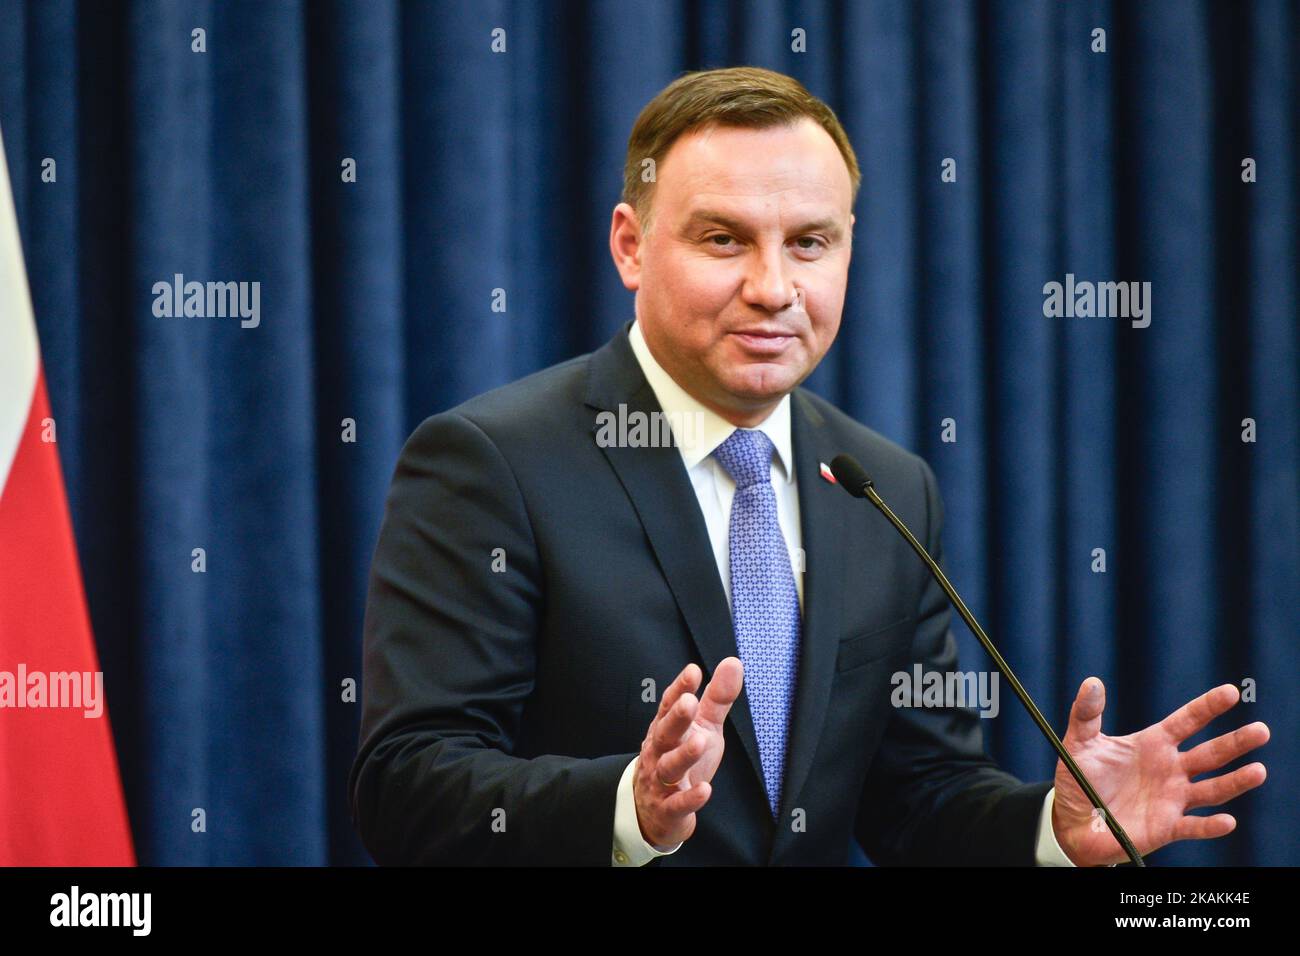 The President of Poland (pictured), Andrzej Duda and the Minister of Labour and Social Policy, Elzbieta Rafalska, arrive for the press conference making the first bilan of the Child Benefit Programme 'Family 500+' in the Presidential Palace in Warsaw. On Wednesday, 8 February 2017, in Warsaw, Poland. (Photo by Artur Widak/NurPhoto) *** Please Use Credit from Credit Field ***  Stock Photo